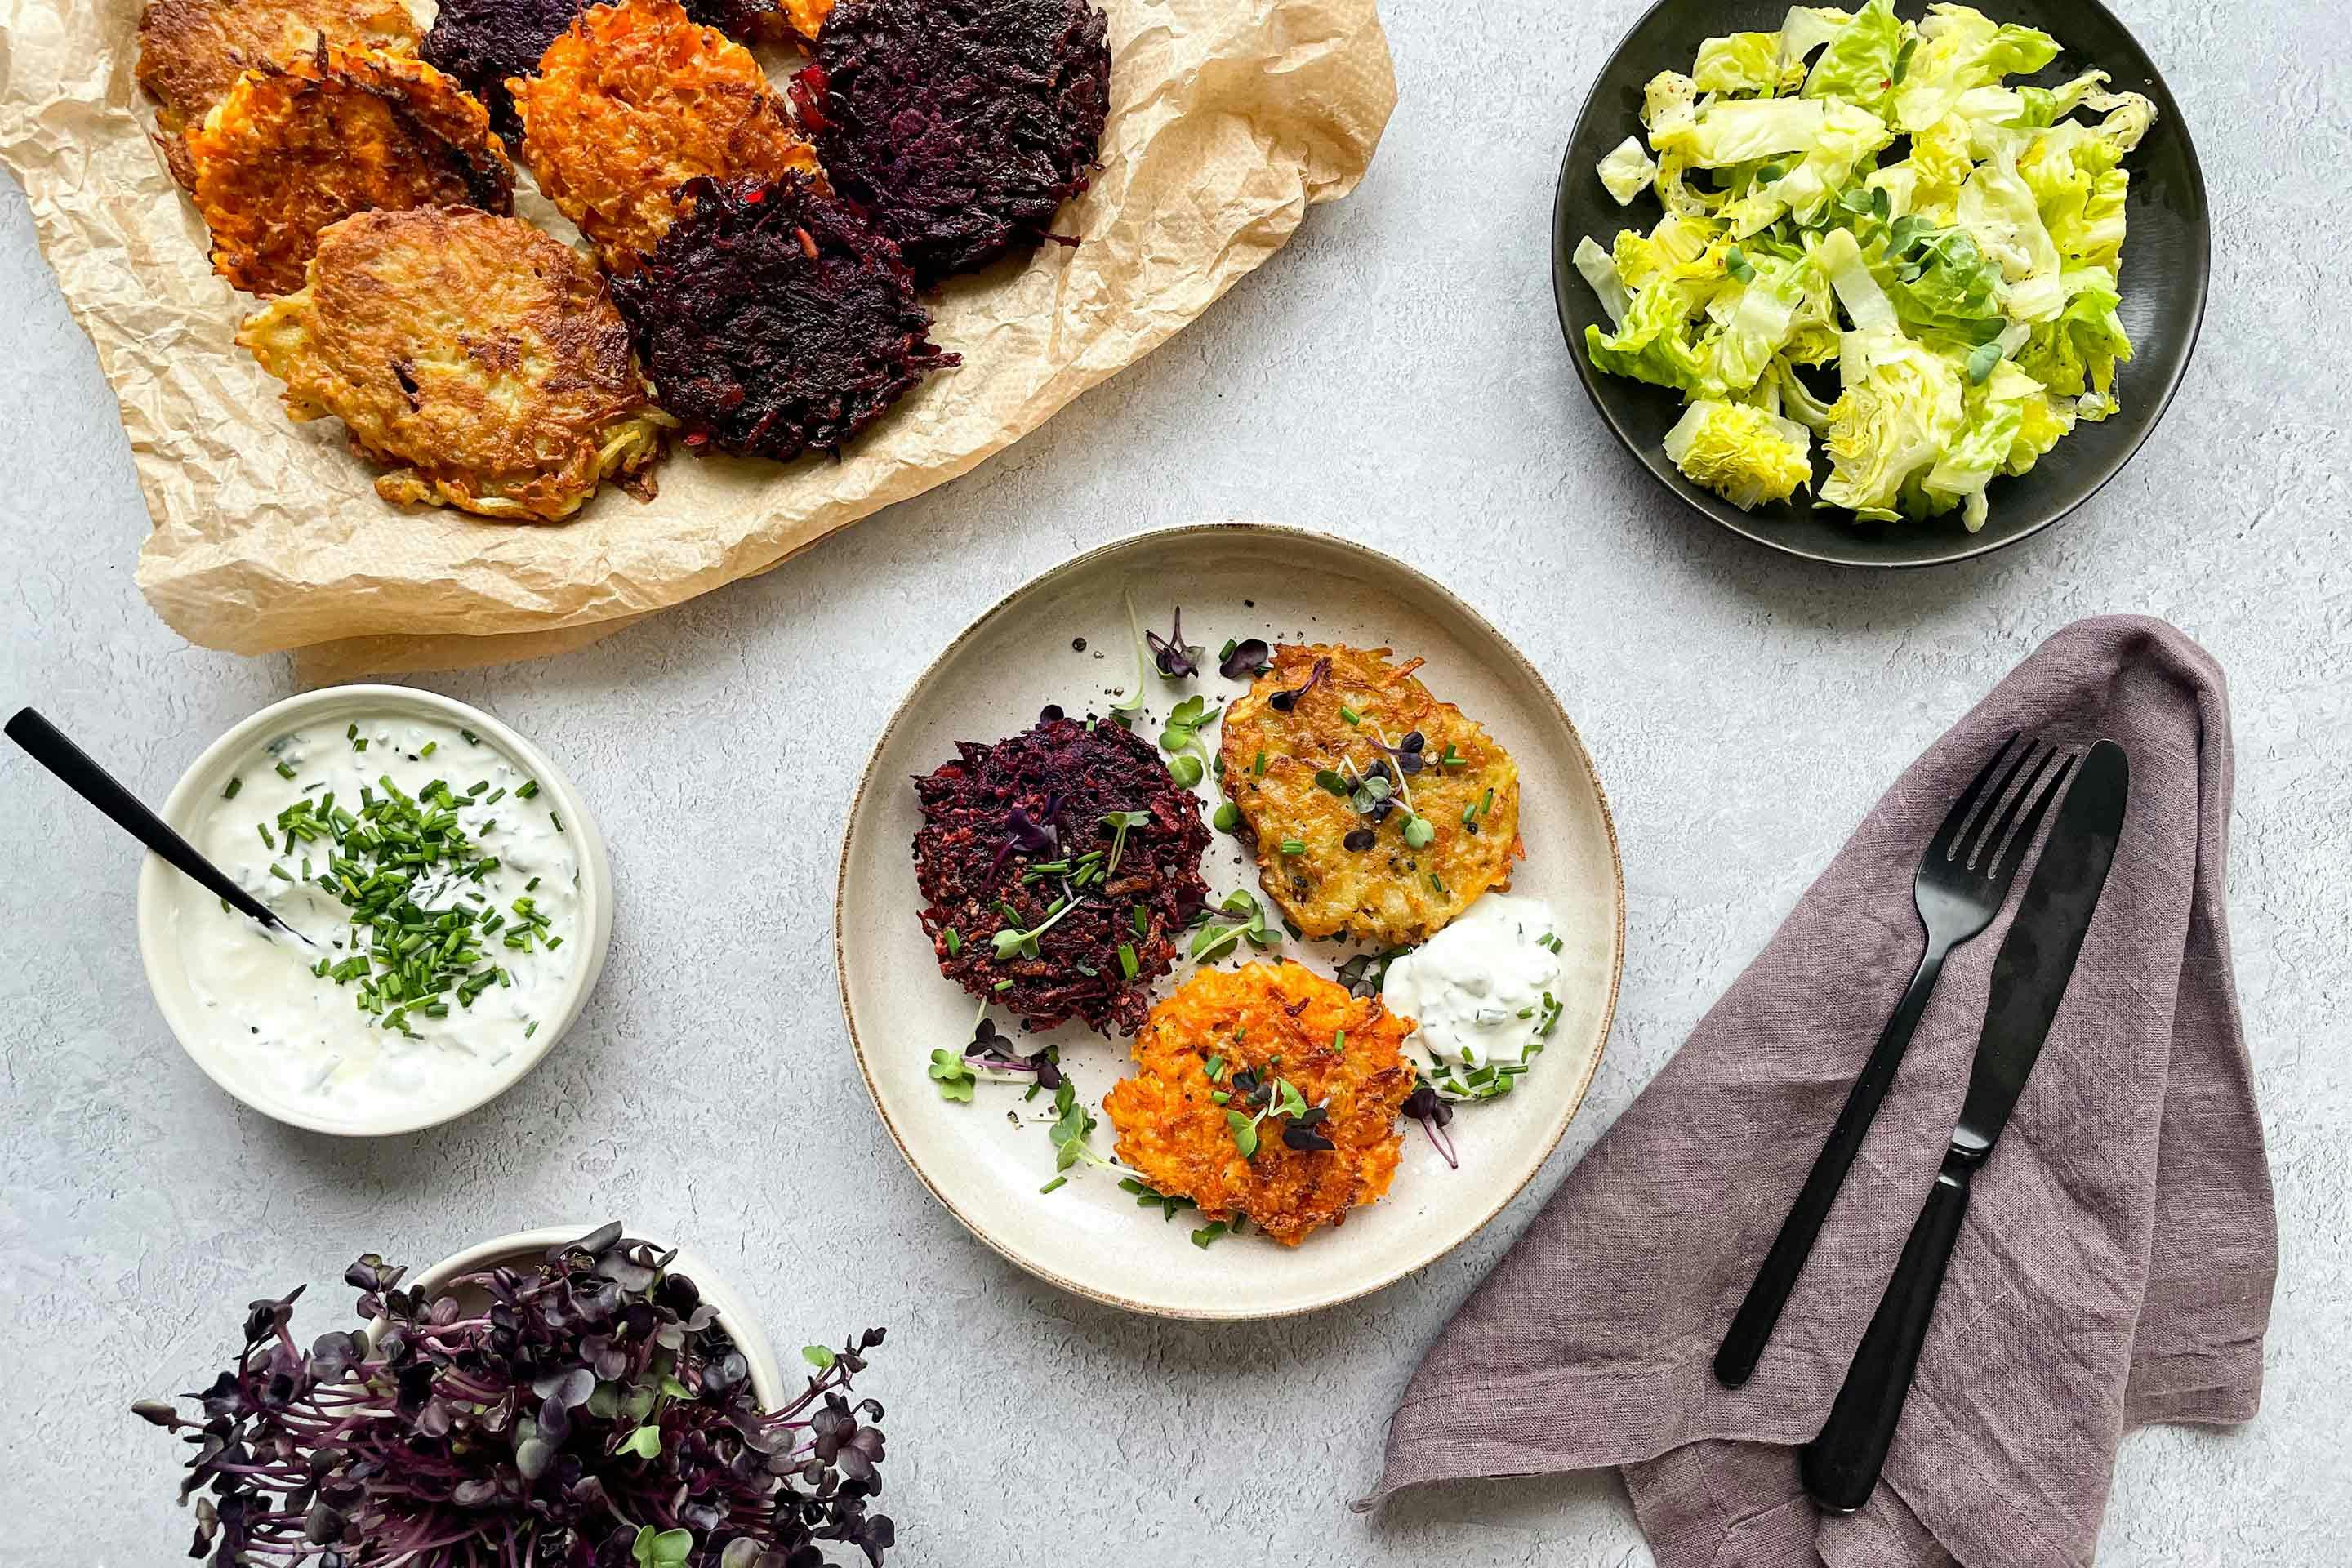 Tasty potato fritters with colorful carrot and beetroot fritters.